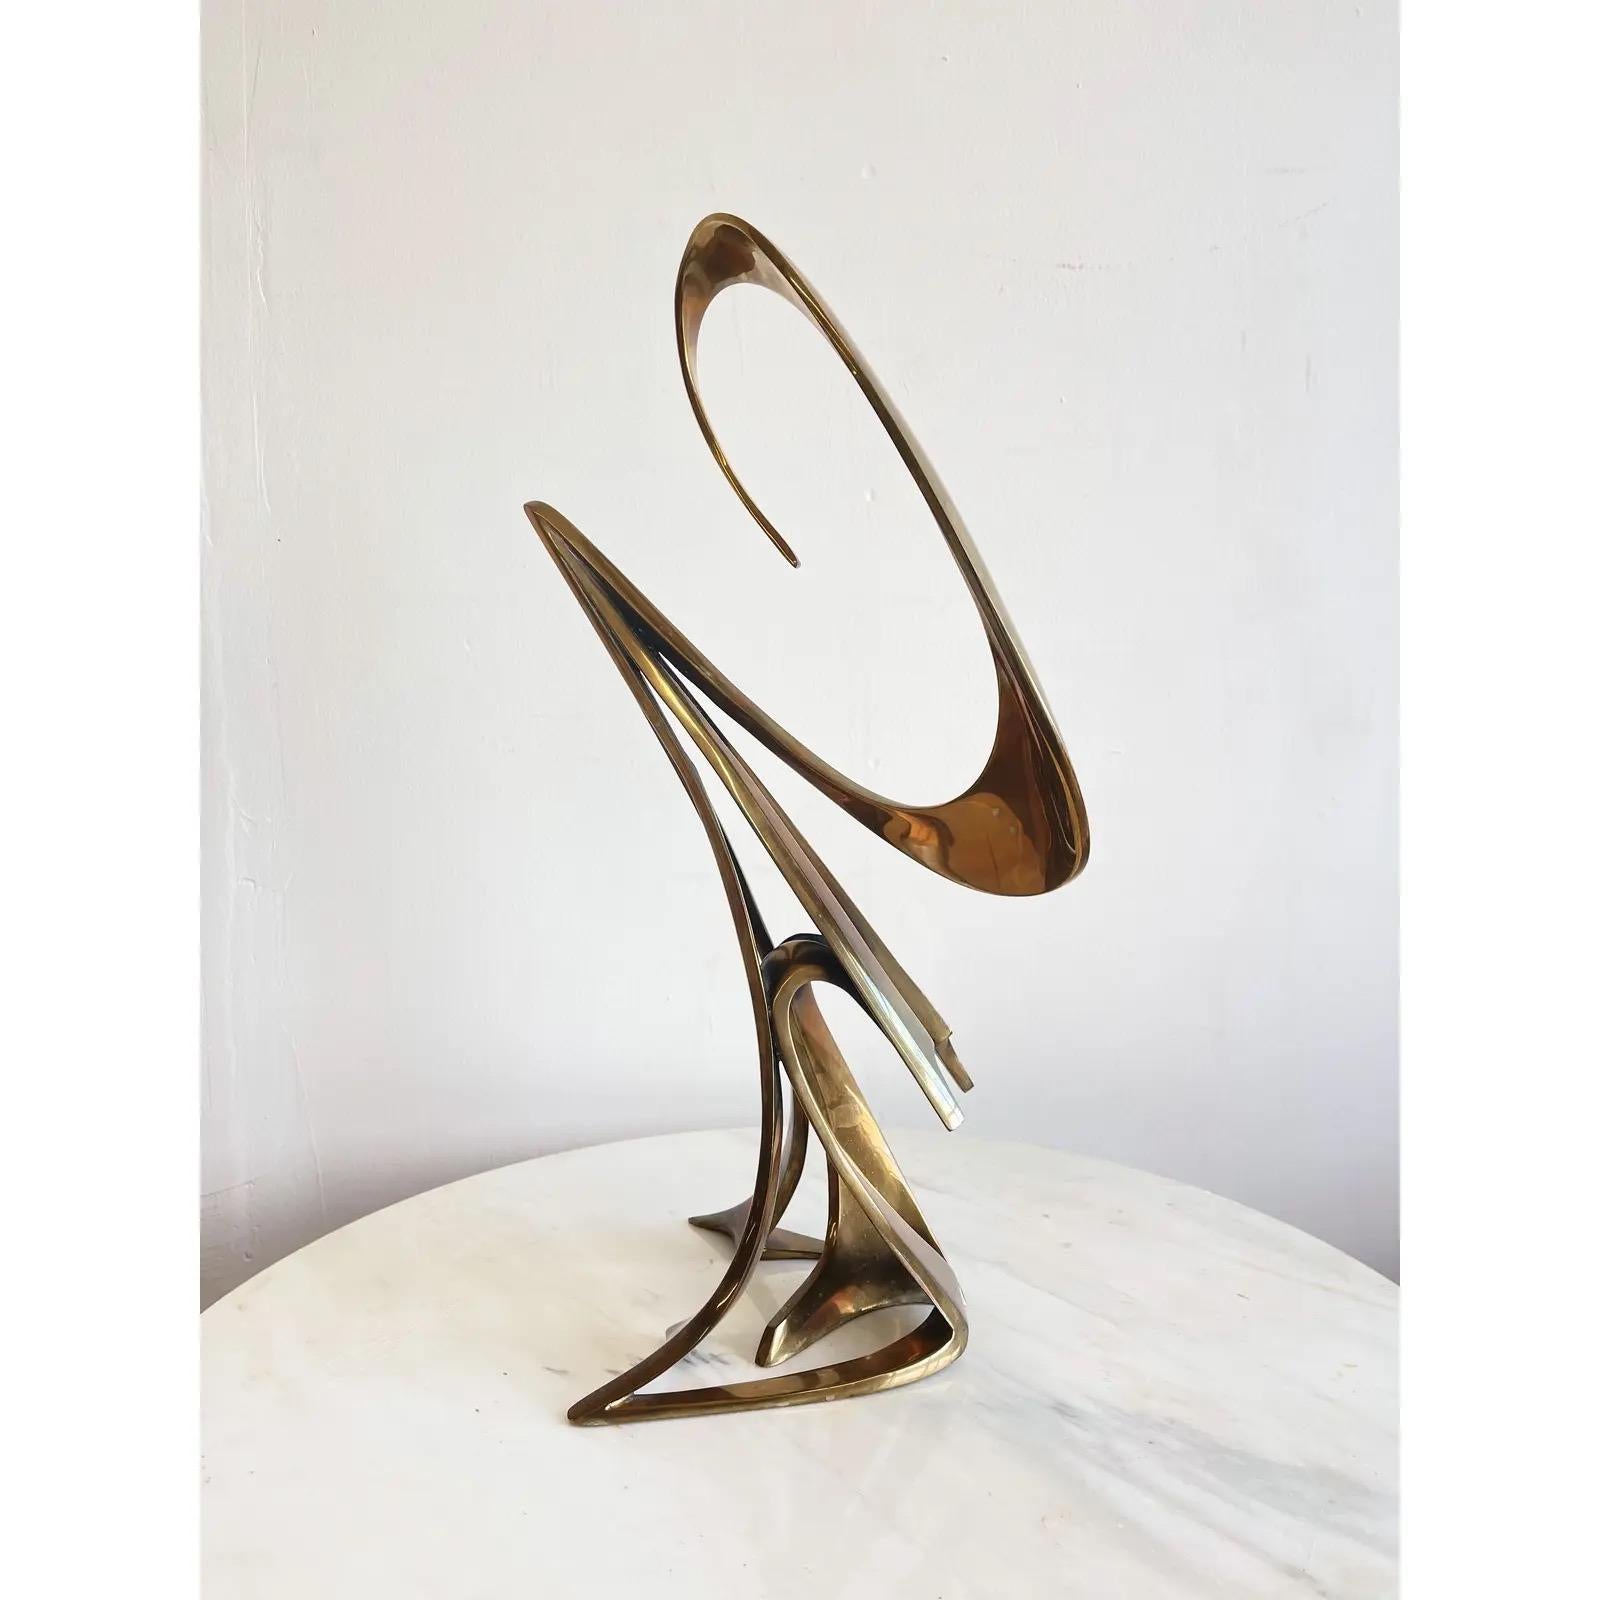 Bob Bennett Bronze Abstract Sculpture 1980s Numbered 25/50 For Sale 2